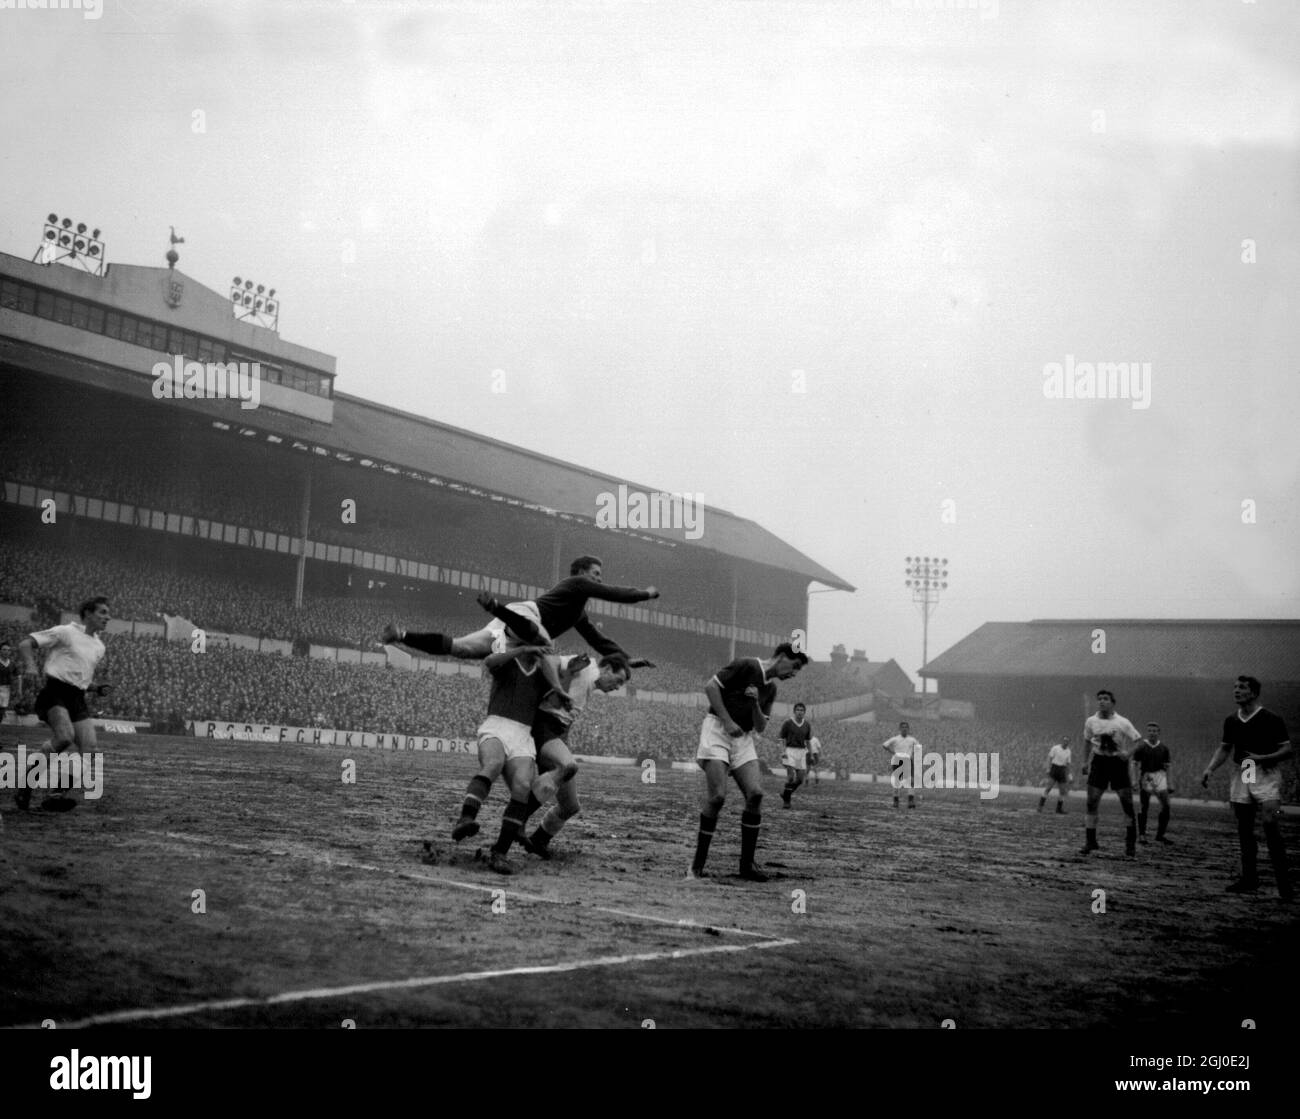 Manchester Utd goalkeeper Gregg flies over the heads of two players, one a Manchester United defender and the other the attacking Spurs player, Dunmore, during the division one match between Tottenham Hotspur and Manchester Utd at White Hart Lane. 7th February 1959. Stock Photo